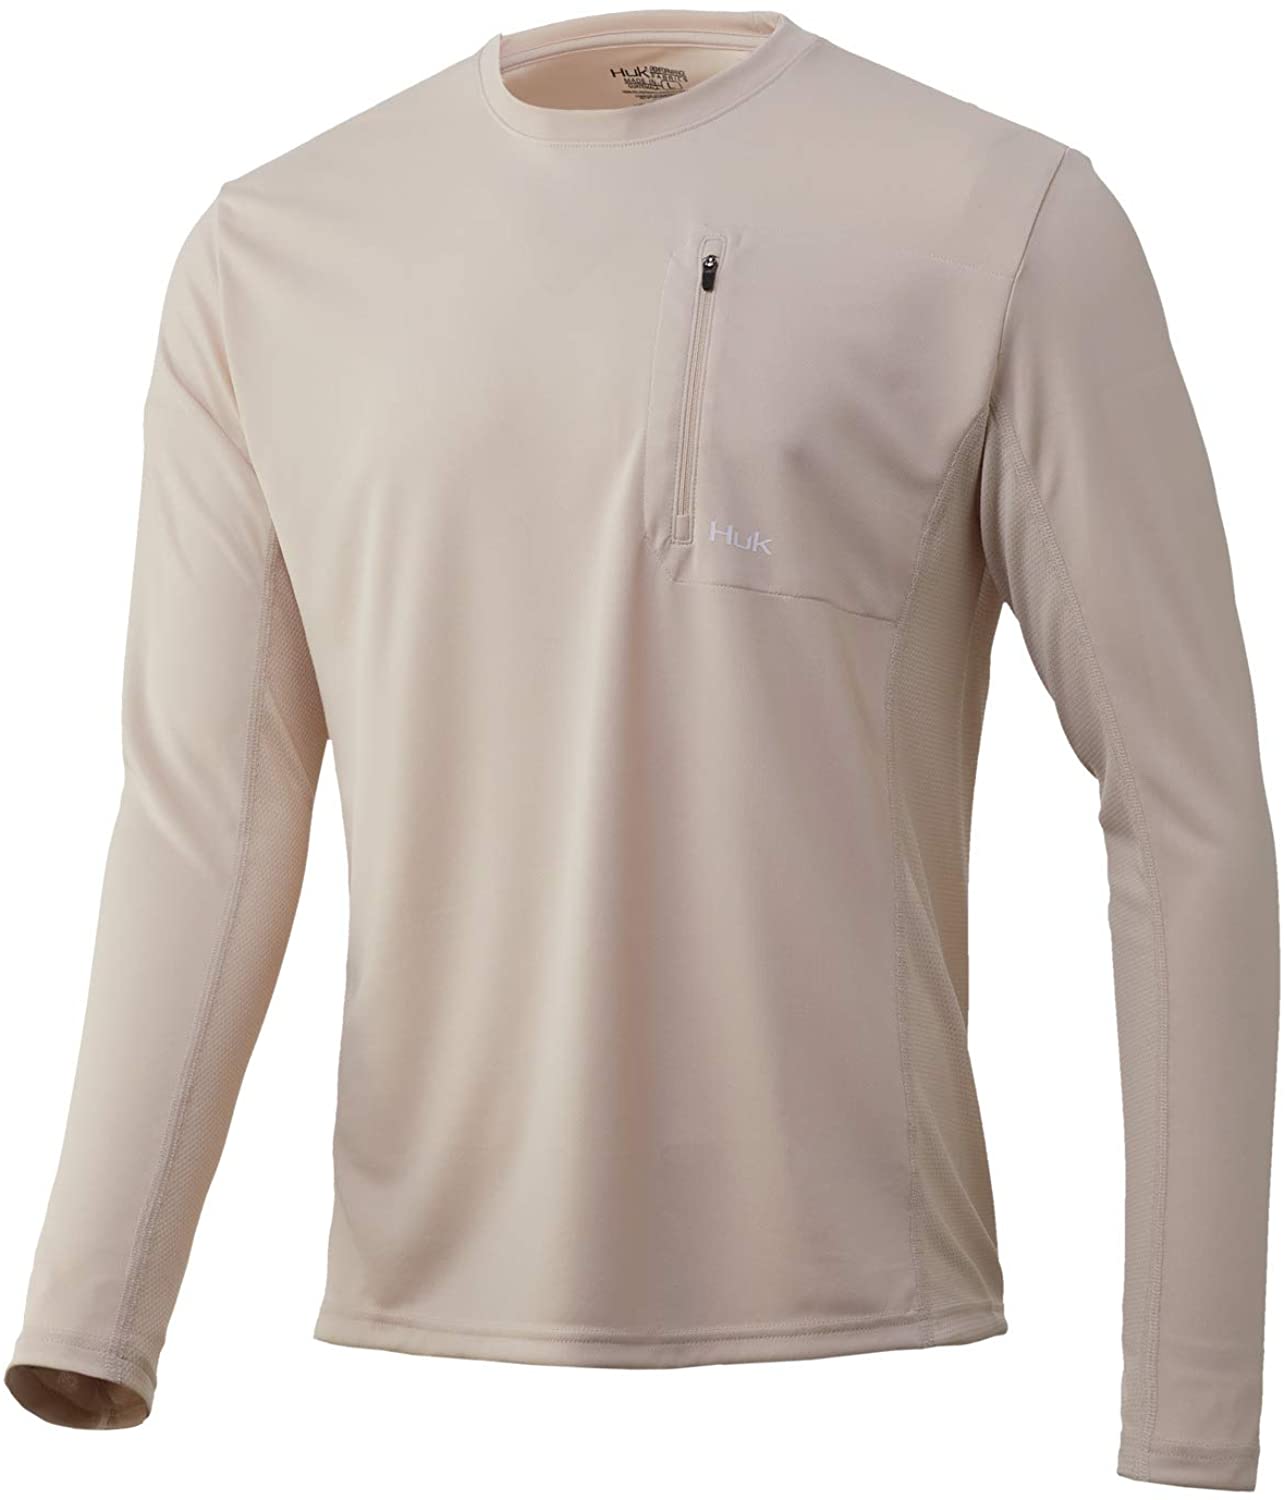 Men's Huk Icon X Pocket Long Sleeve Shirt in Bone from the front